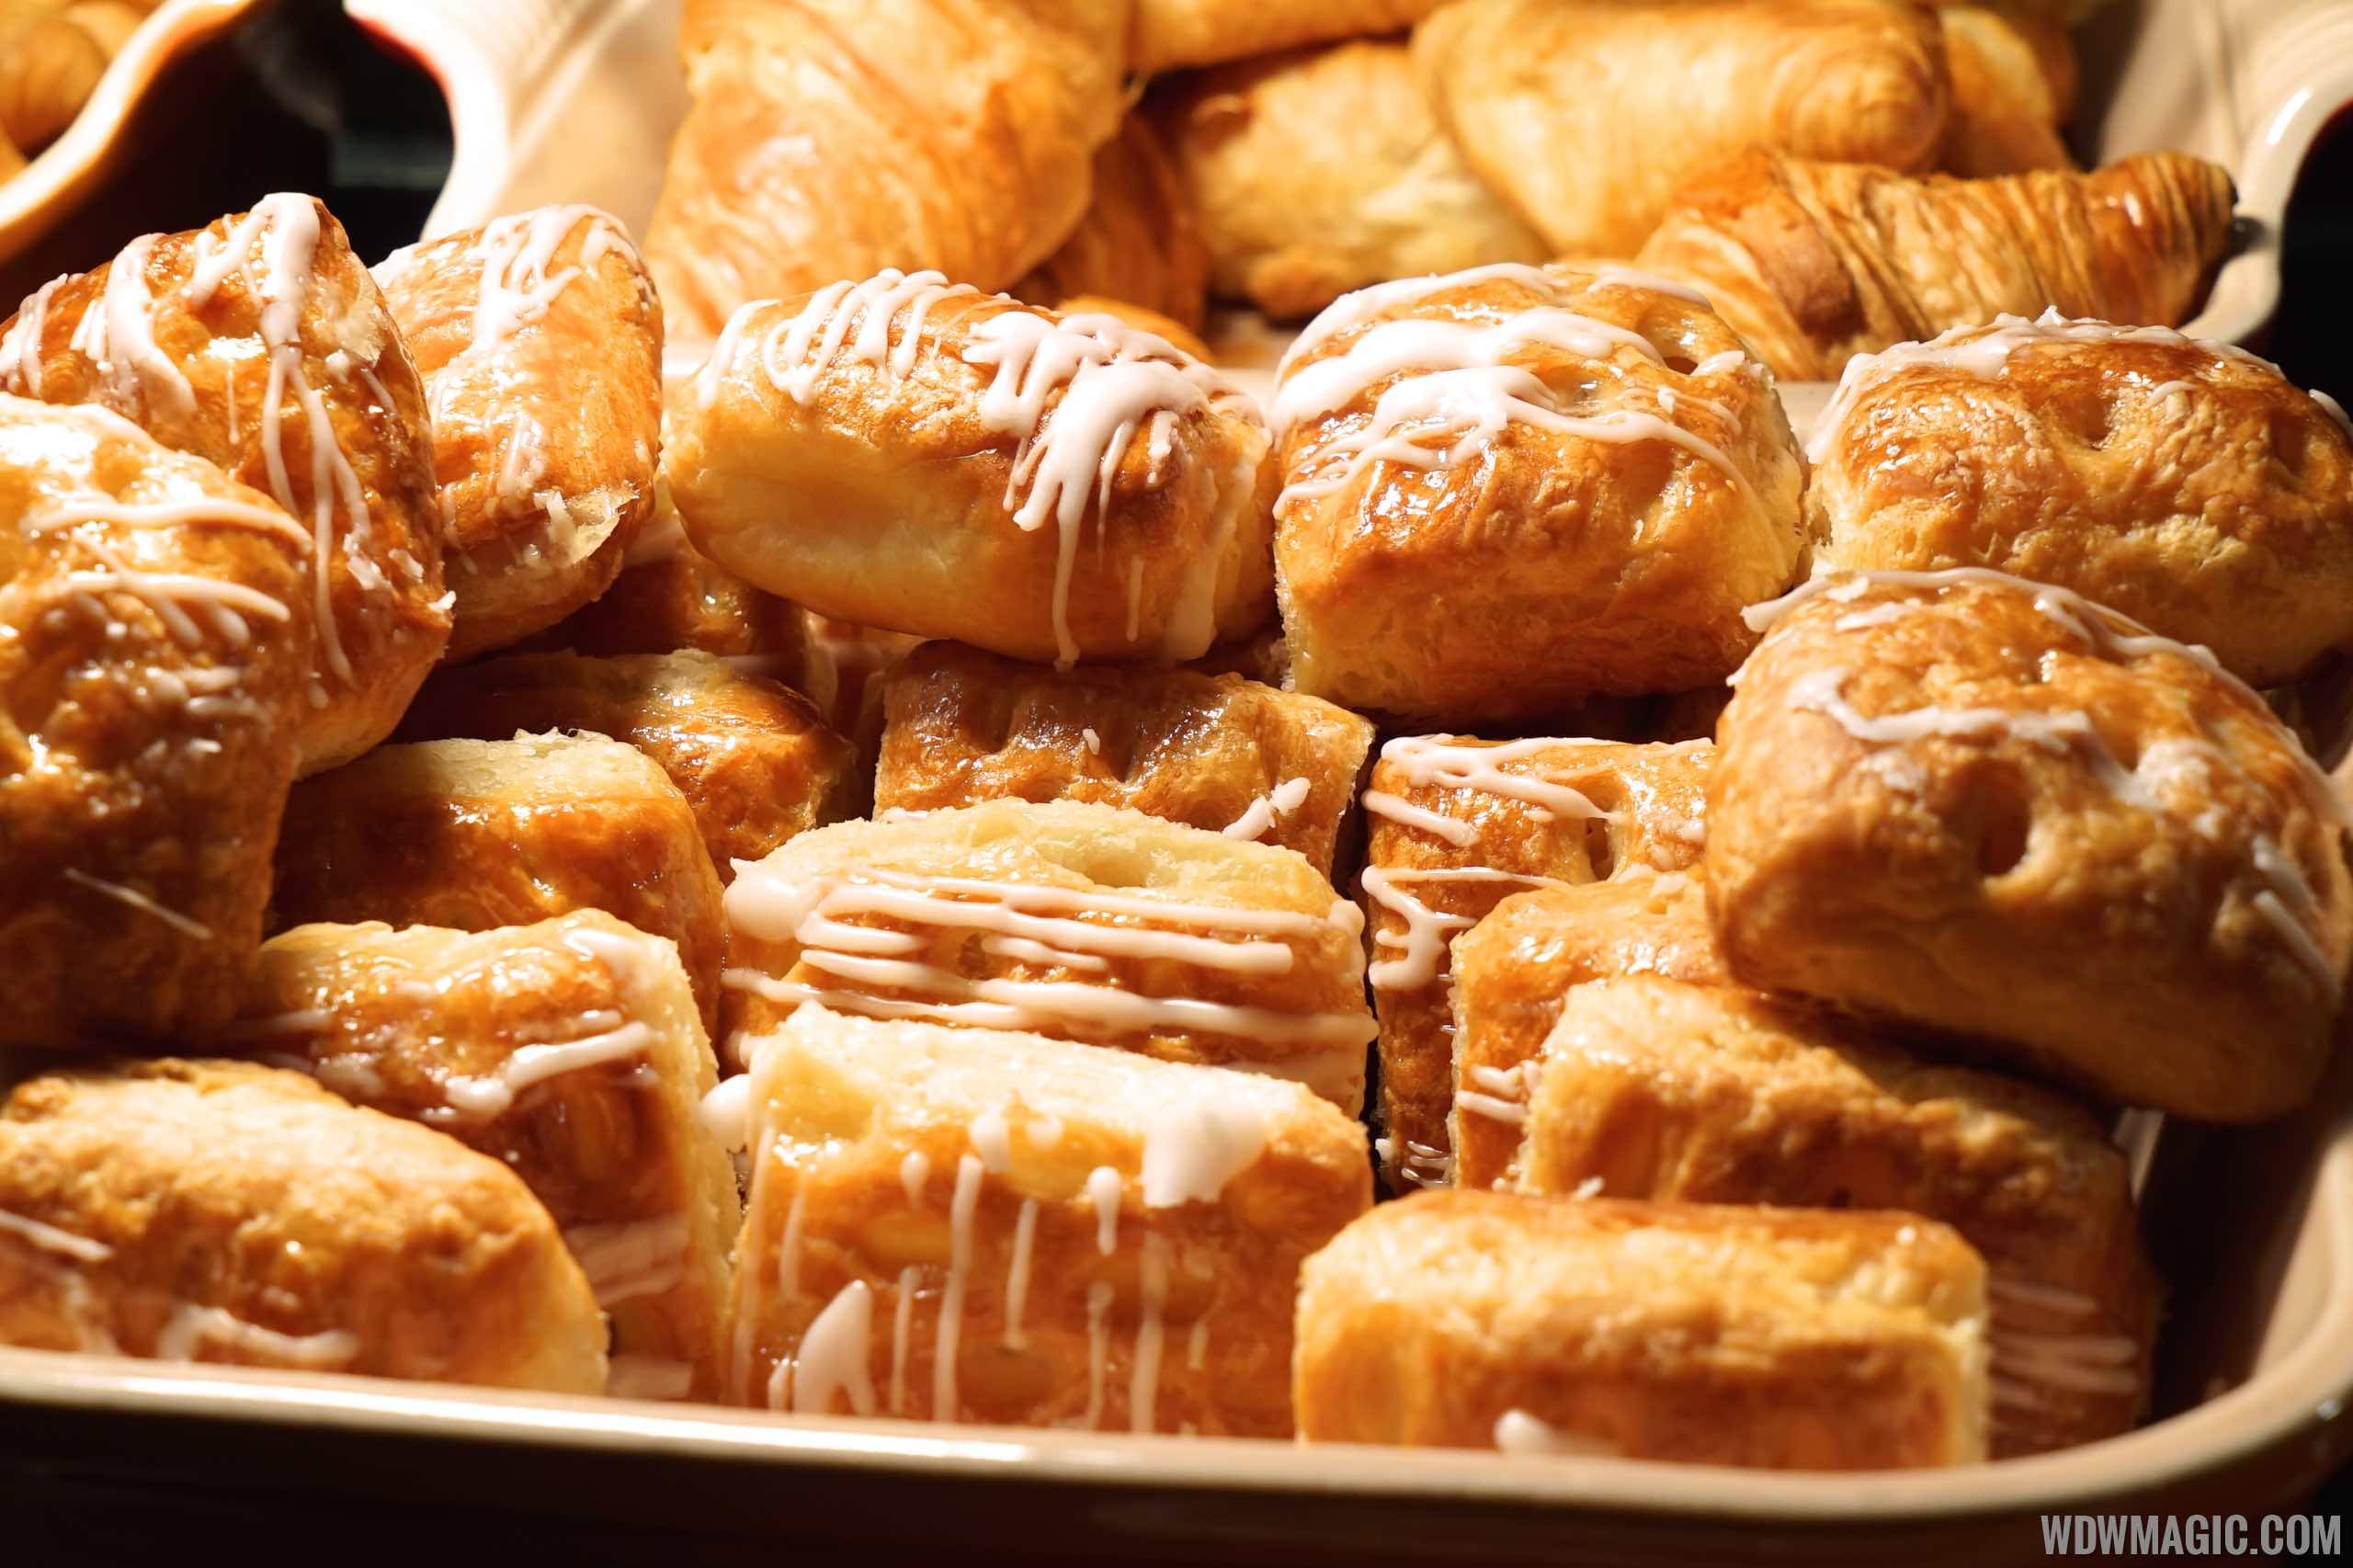 Boma Breakfast - Apple Turnover Pastries